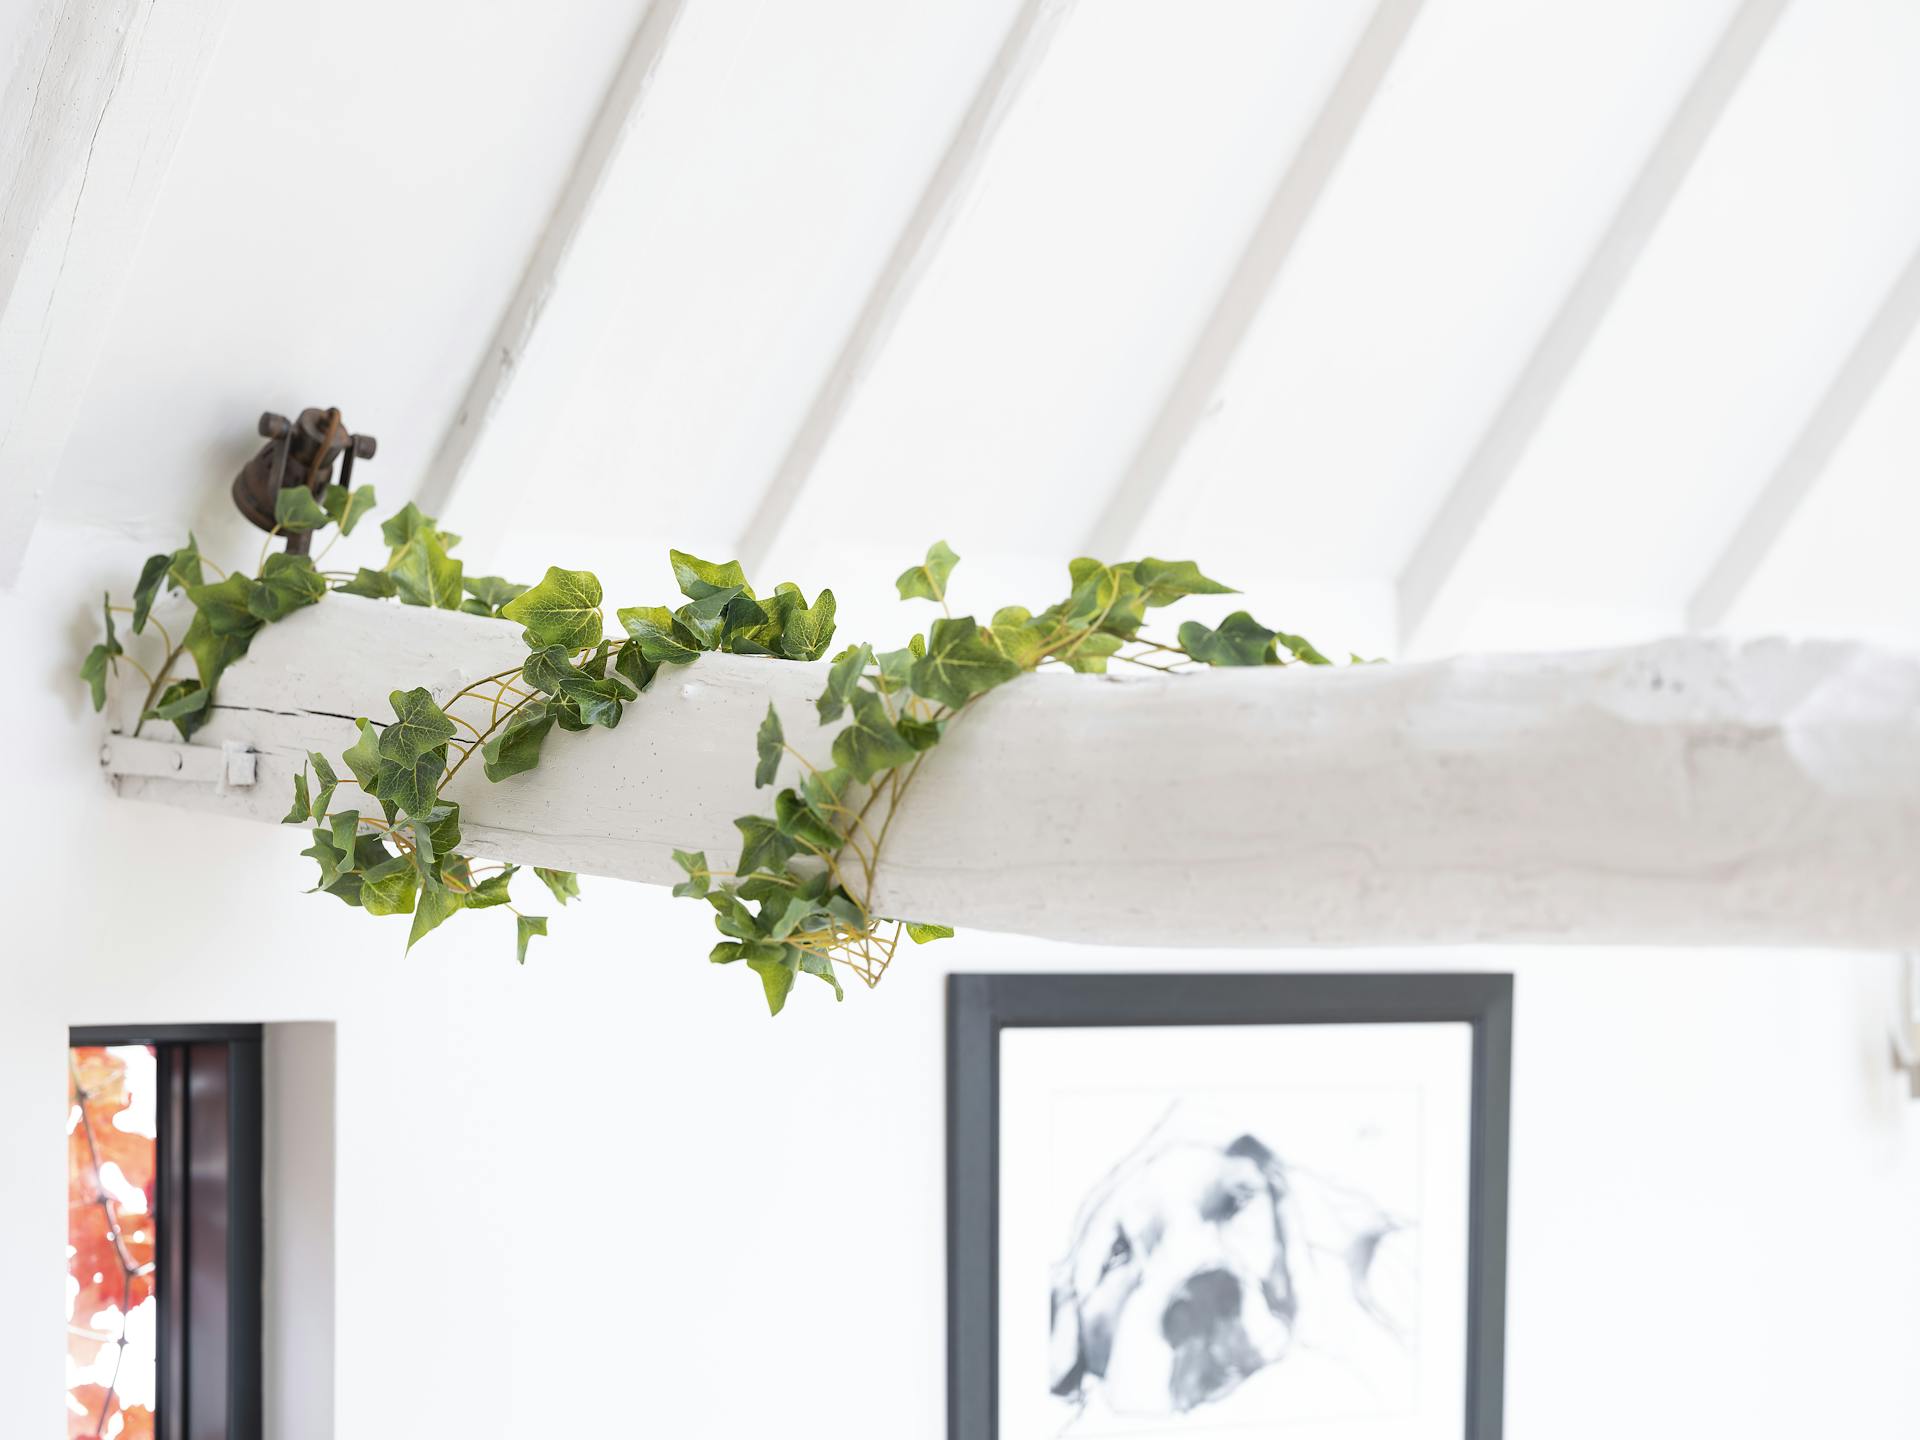 Artificial green ivy bush on white wooden beam